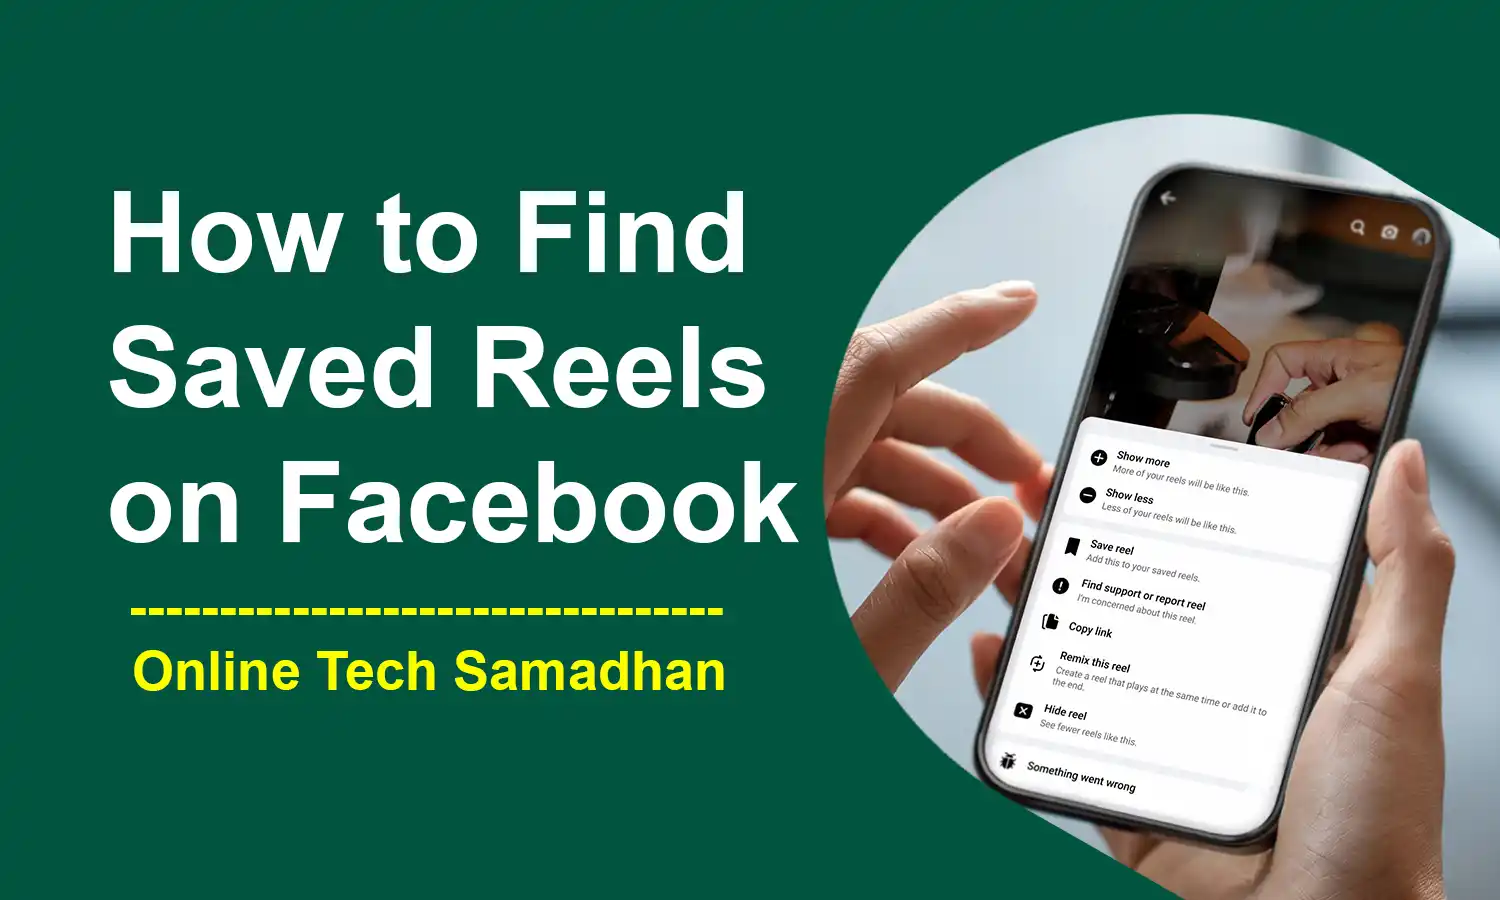 How to Find Saved Reels on Facebook Quick Guide